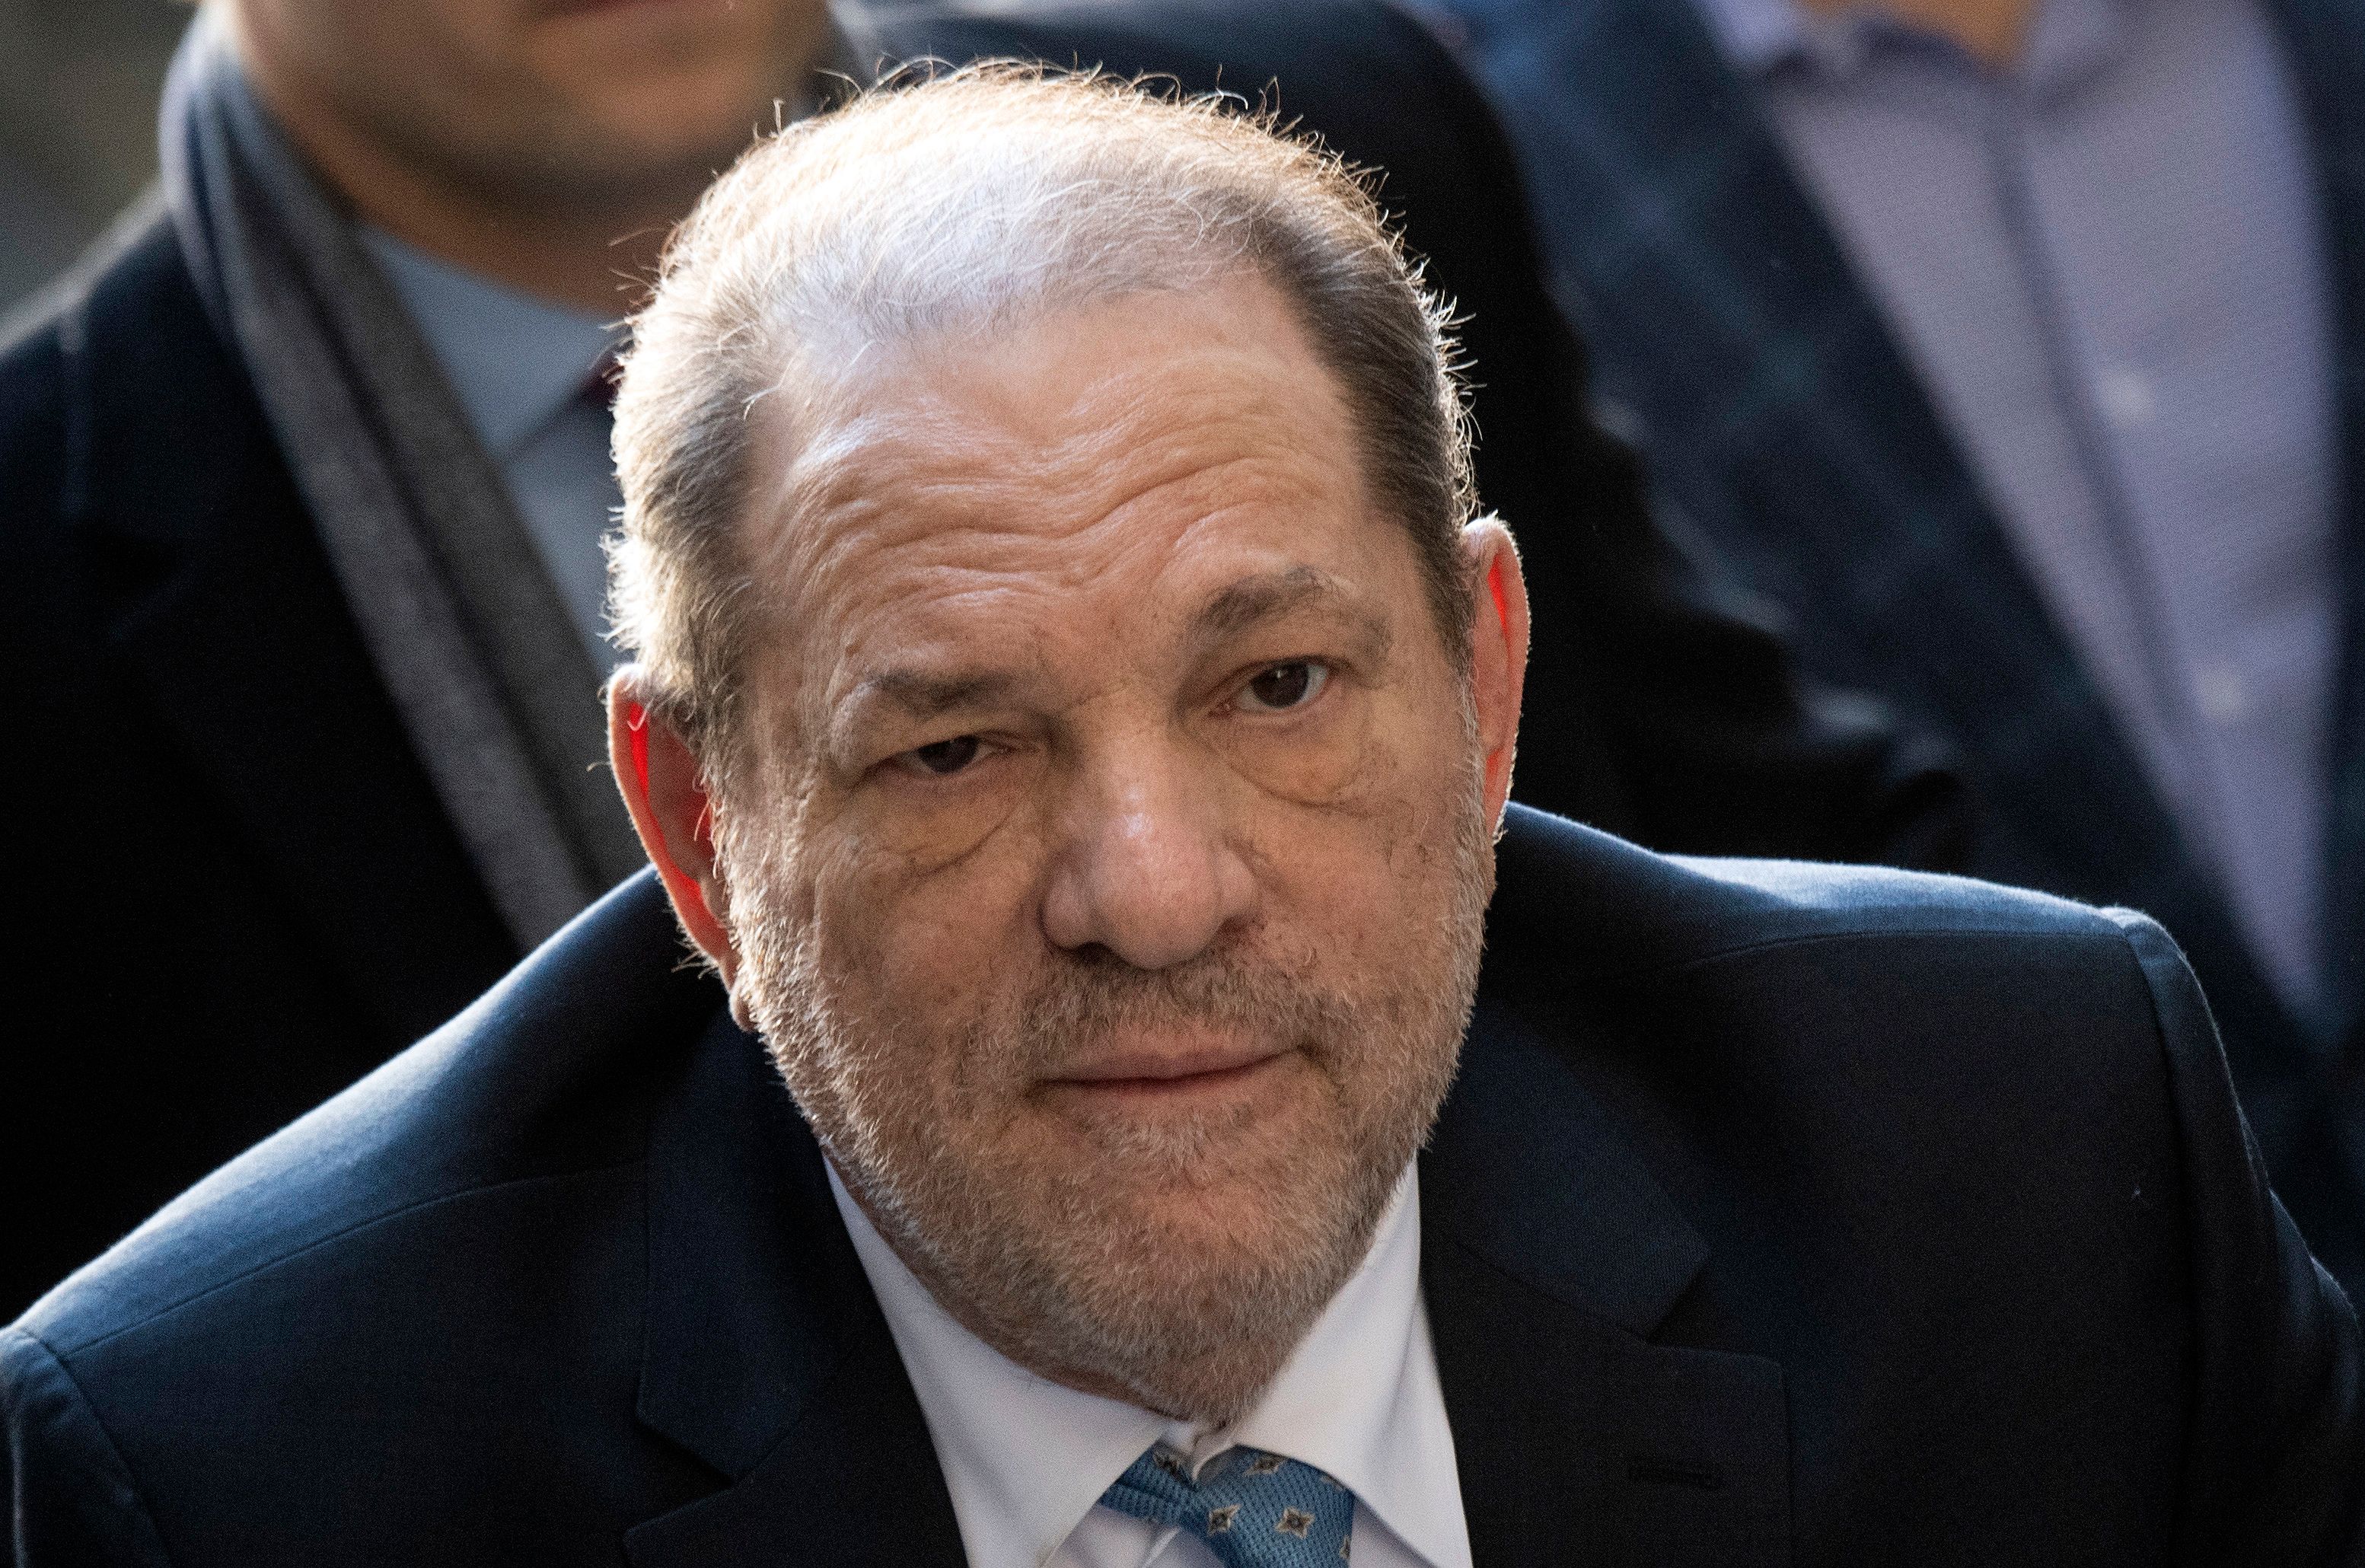 Harvey Weinstein at the Manhattan Criminal Court in New York, where he was convicted of rape, on February 24, 2020. (Johannes Eisele—AFP/Getty Images)